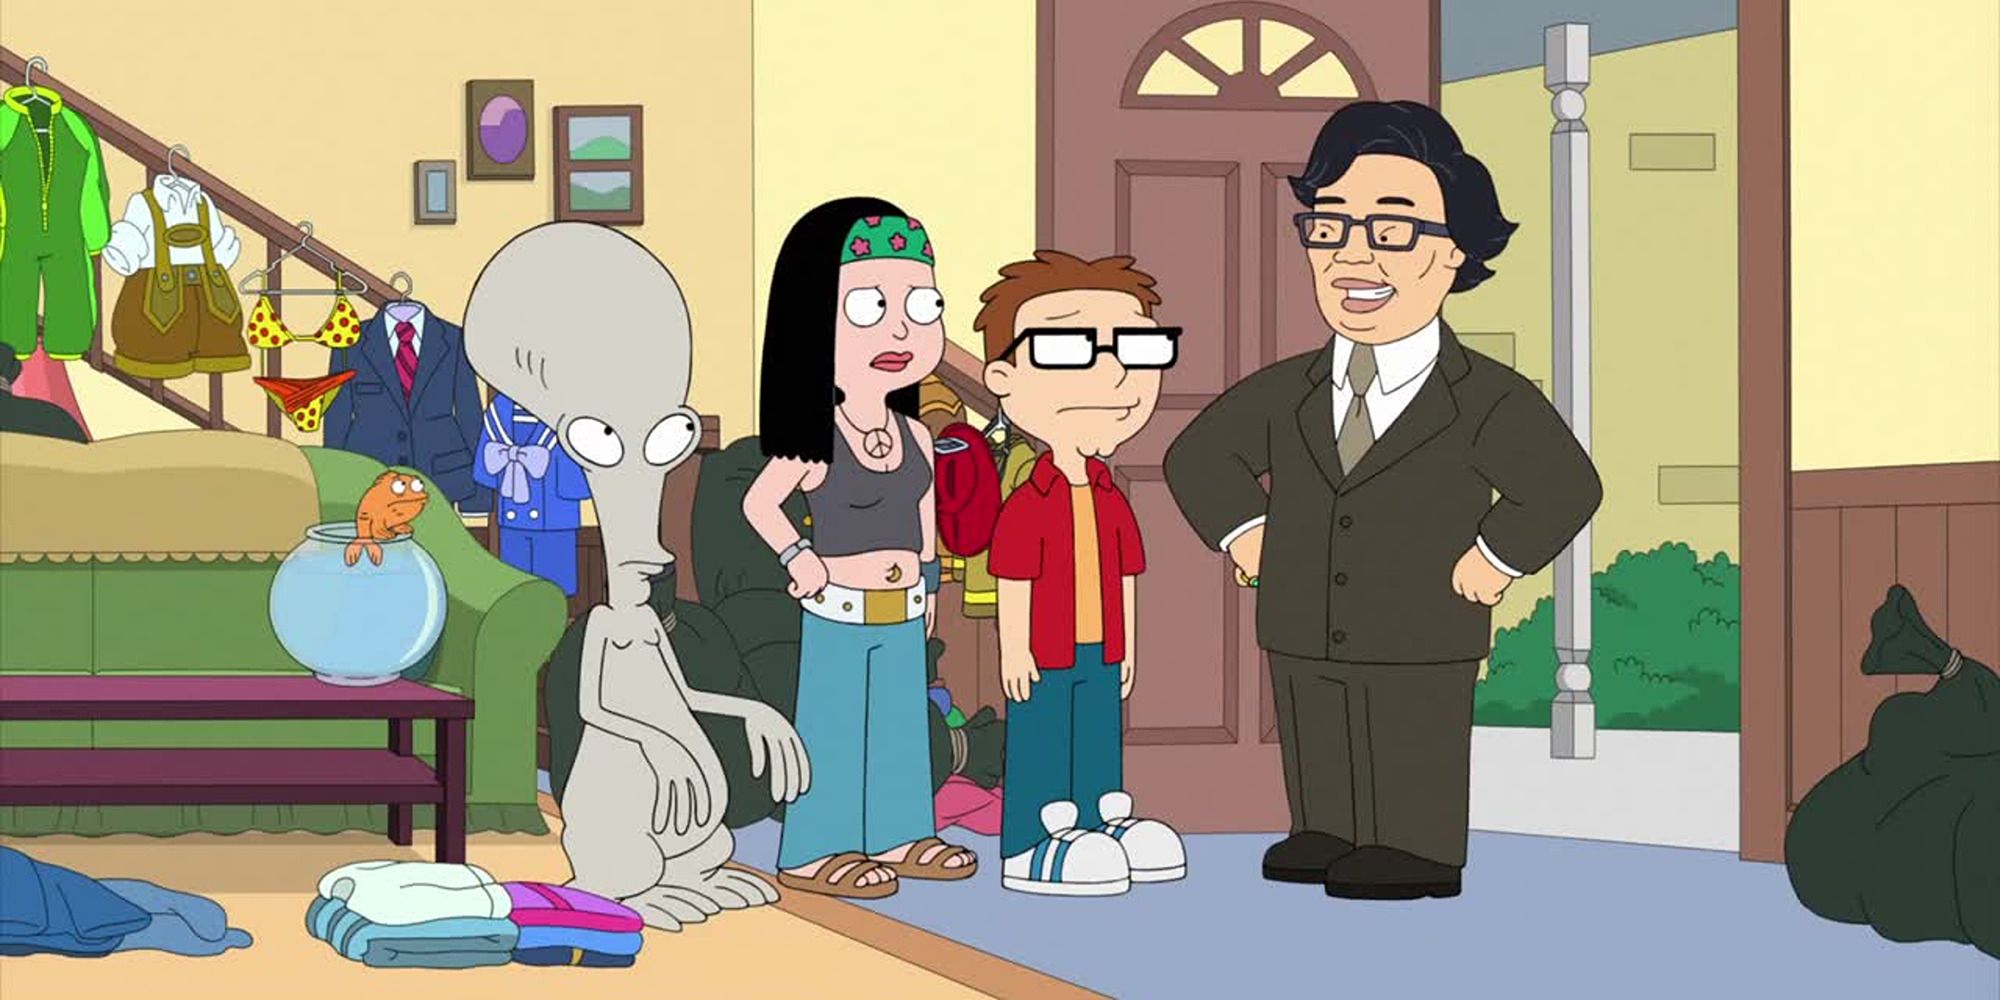 an alien, a hippie girl, a guy with glasses, and a Chinese billionaire standing at the door